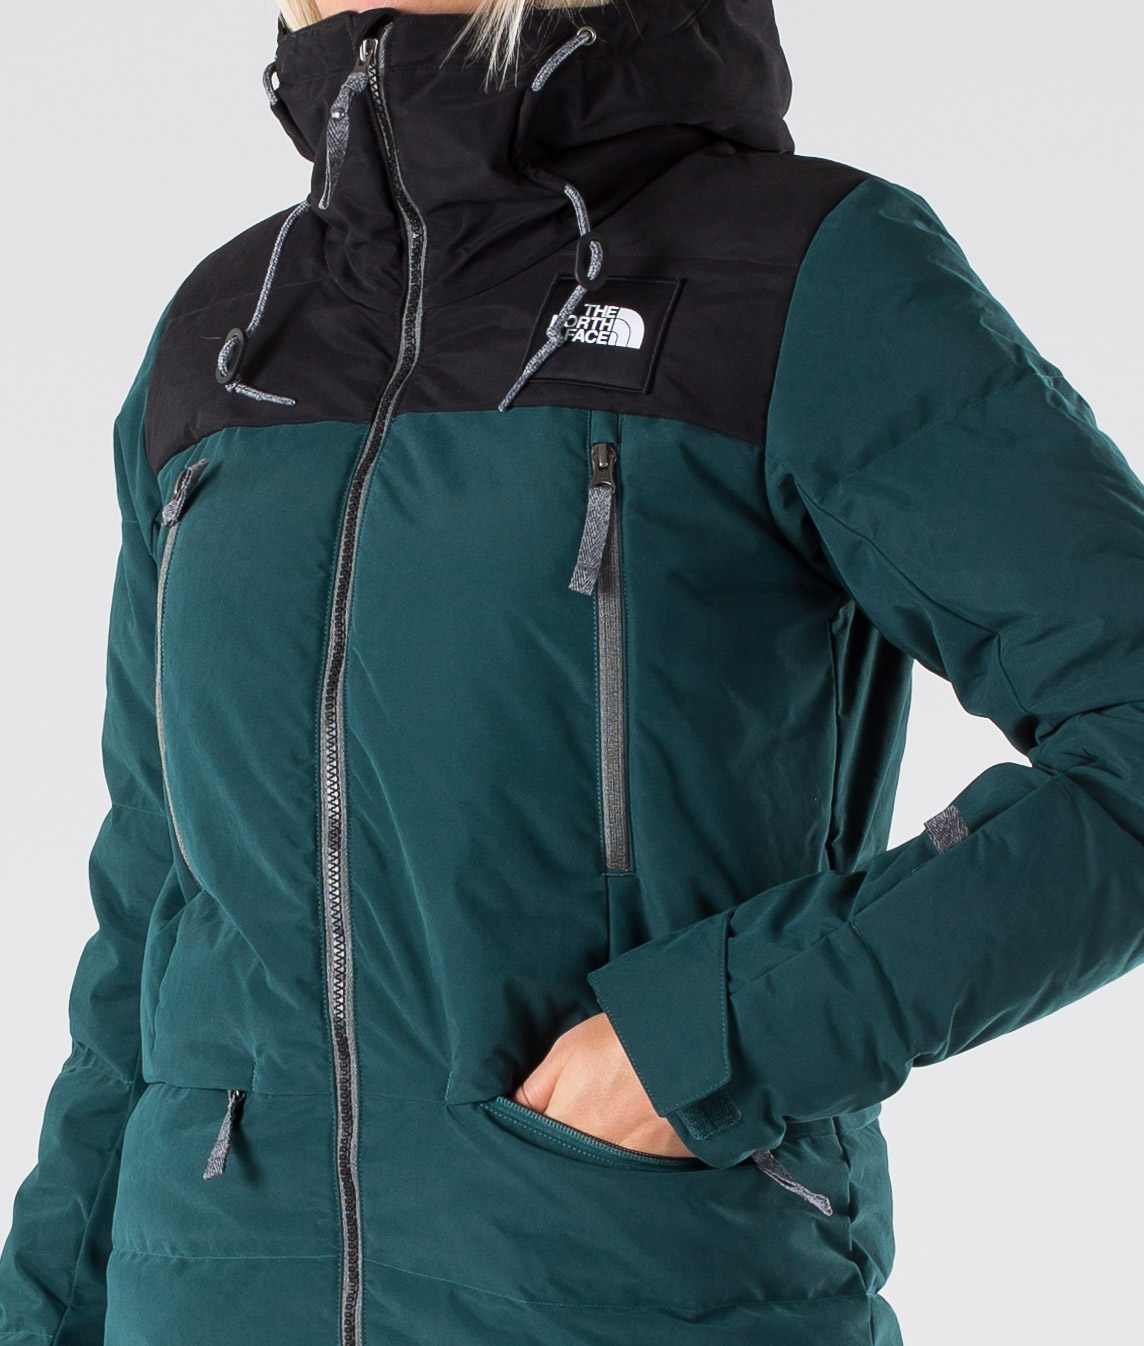 north face thin puffer jacket